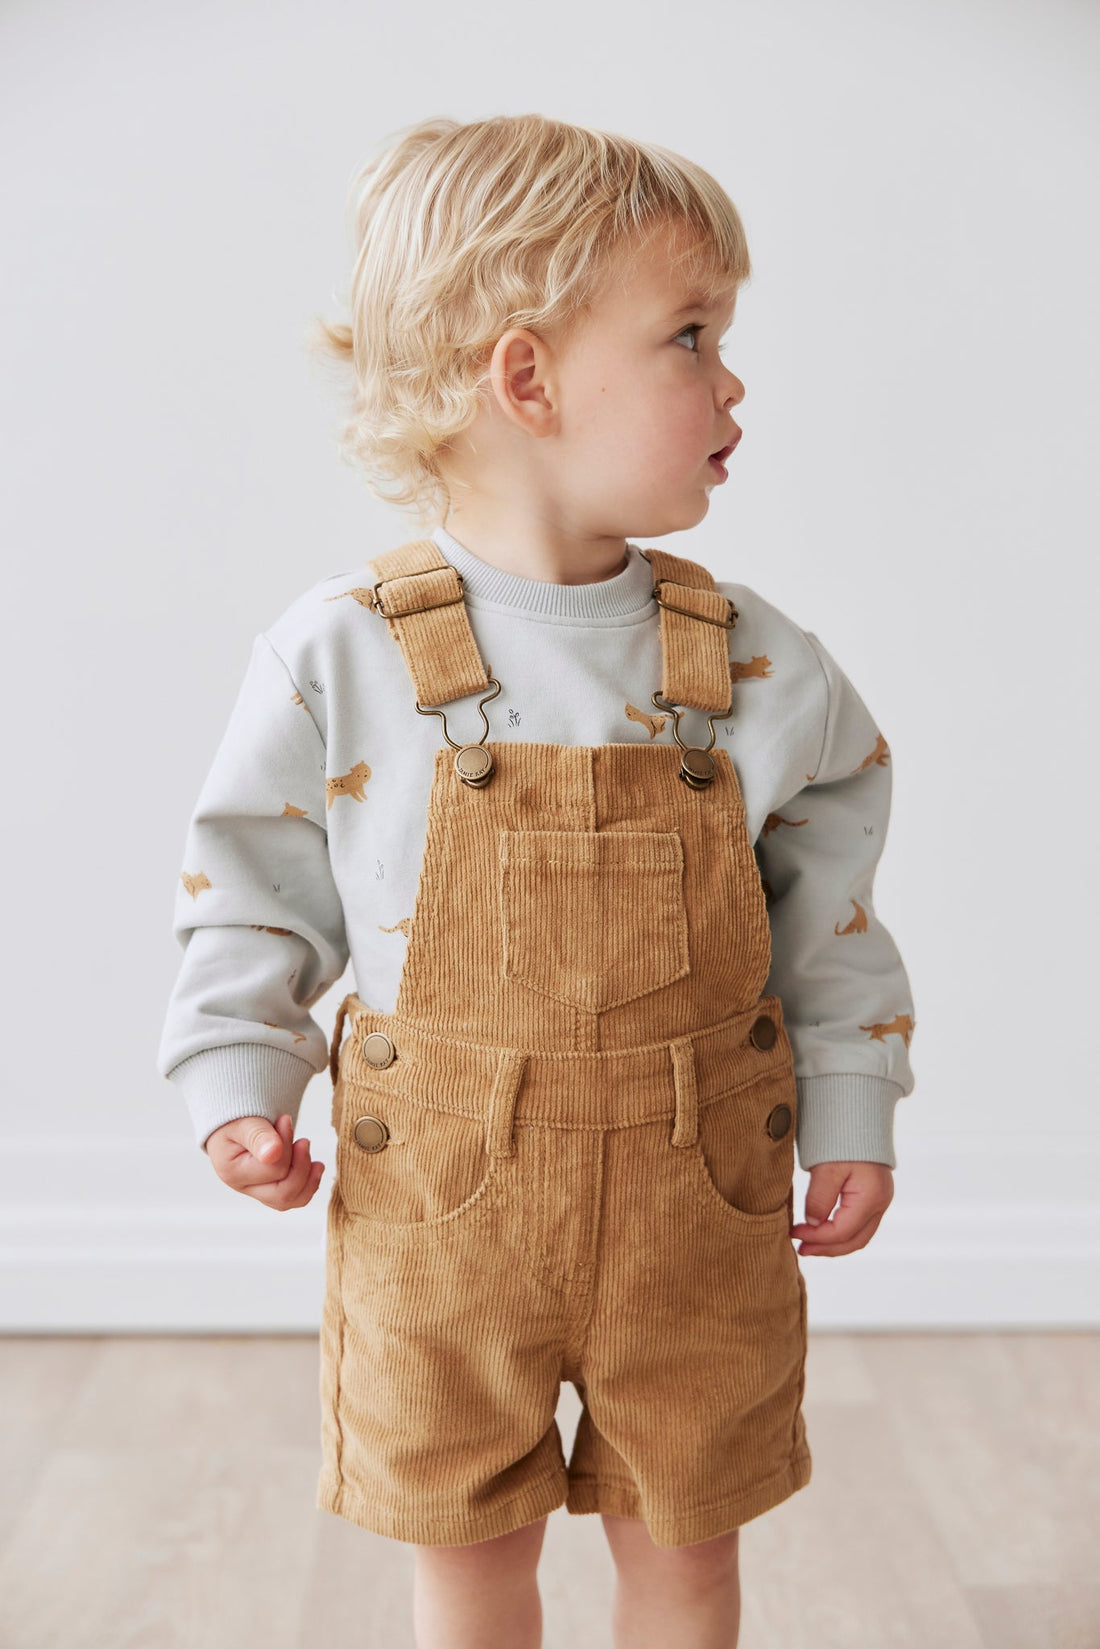 Casey Cord Short Overall - Bronzed Childrens Overall from Jamie Kay USA